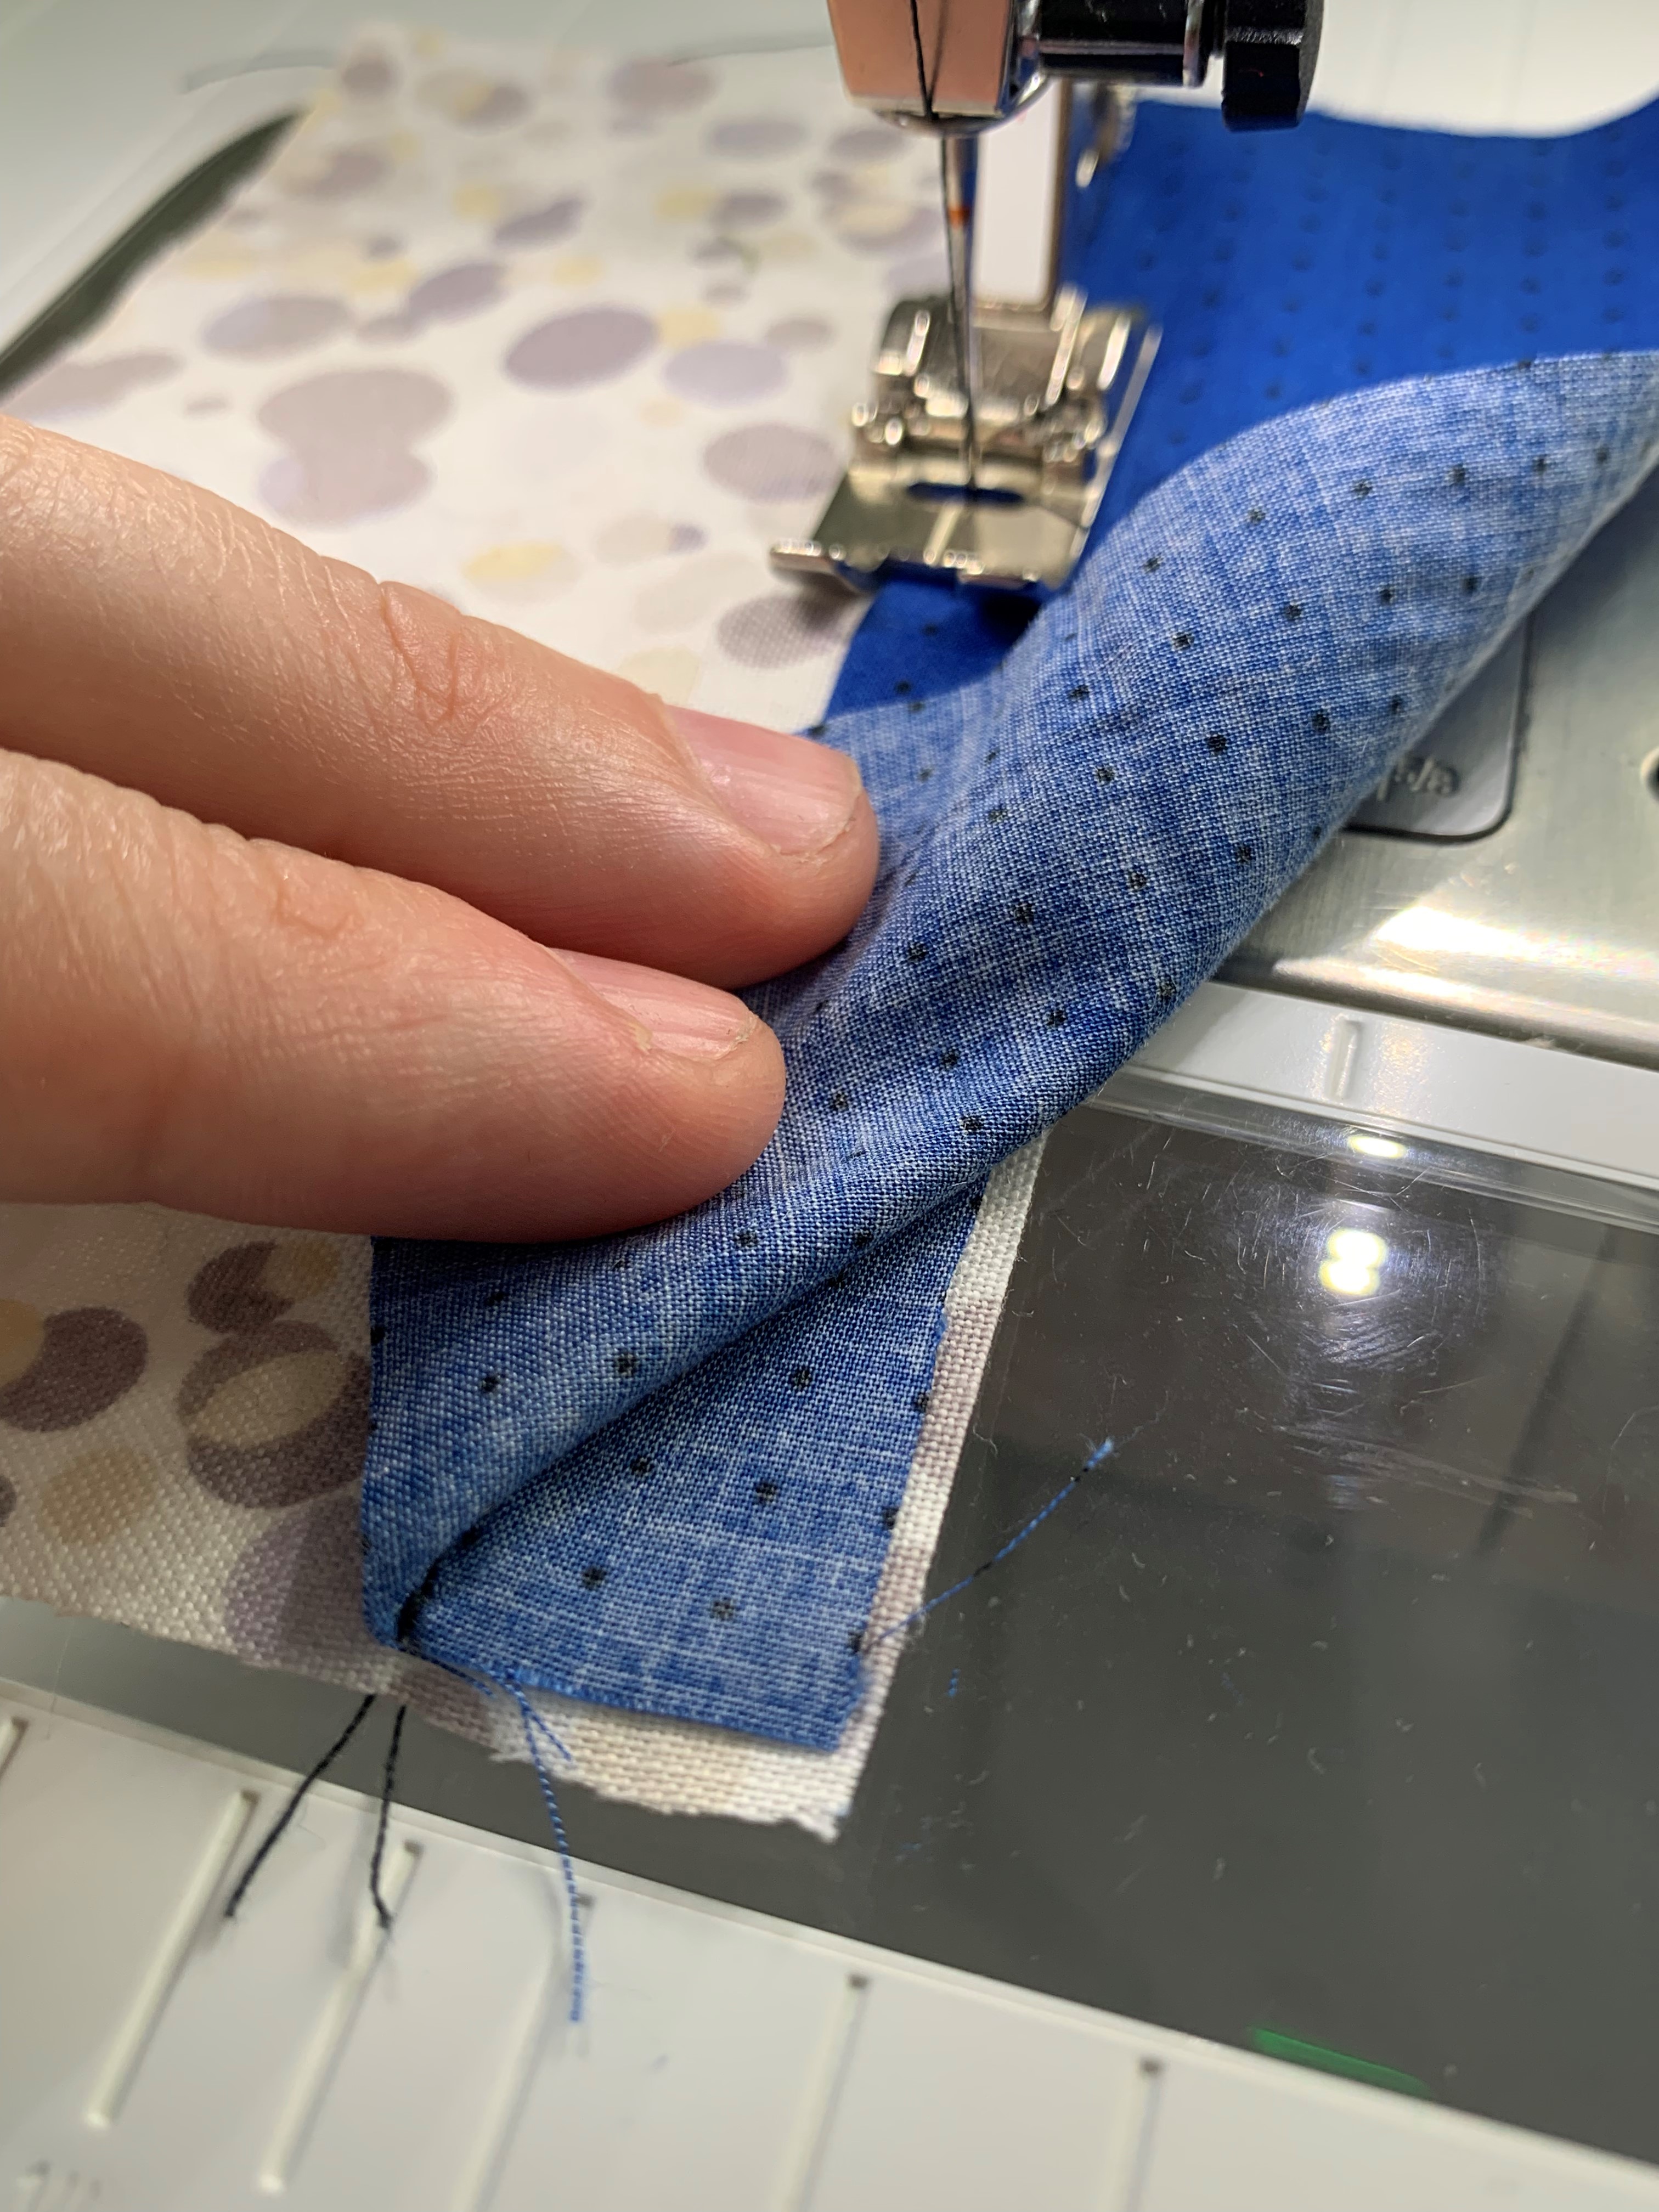 Sewing Needle Guide: What to Use and Why - WeAllSew